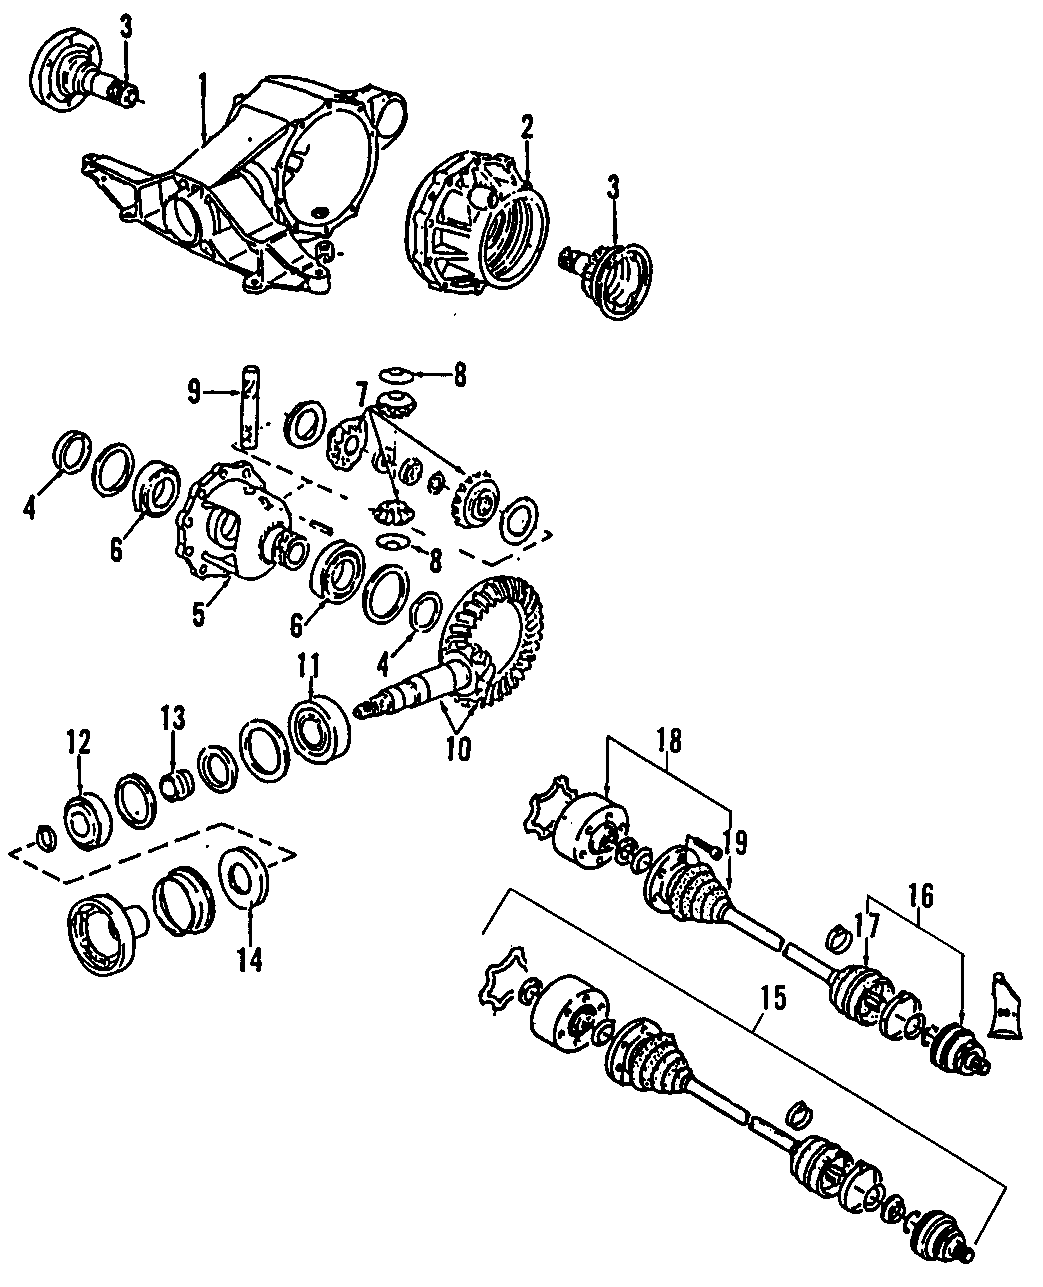 14DRIVE AXLES. REAR AXLE. AXLE SHAFTS & JOINTS. DIFFERENTIAL. PROPELLER SHAFT.https://images.simplepart.com/images/parts/motor/fullsize/F207090.png